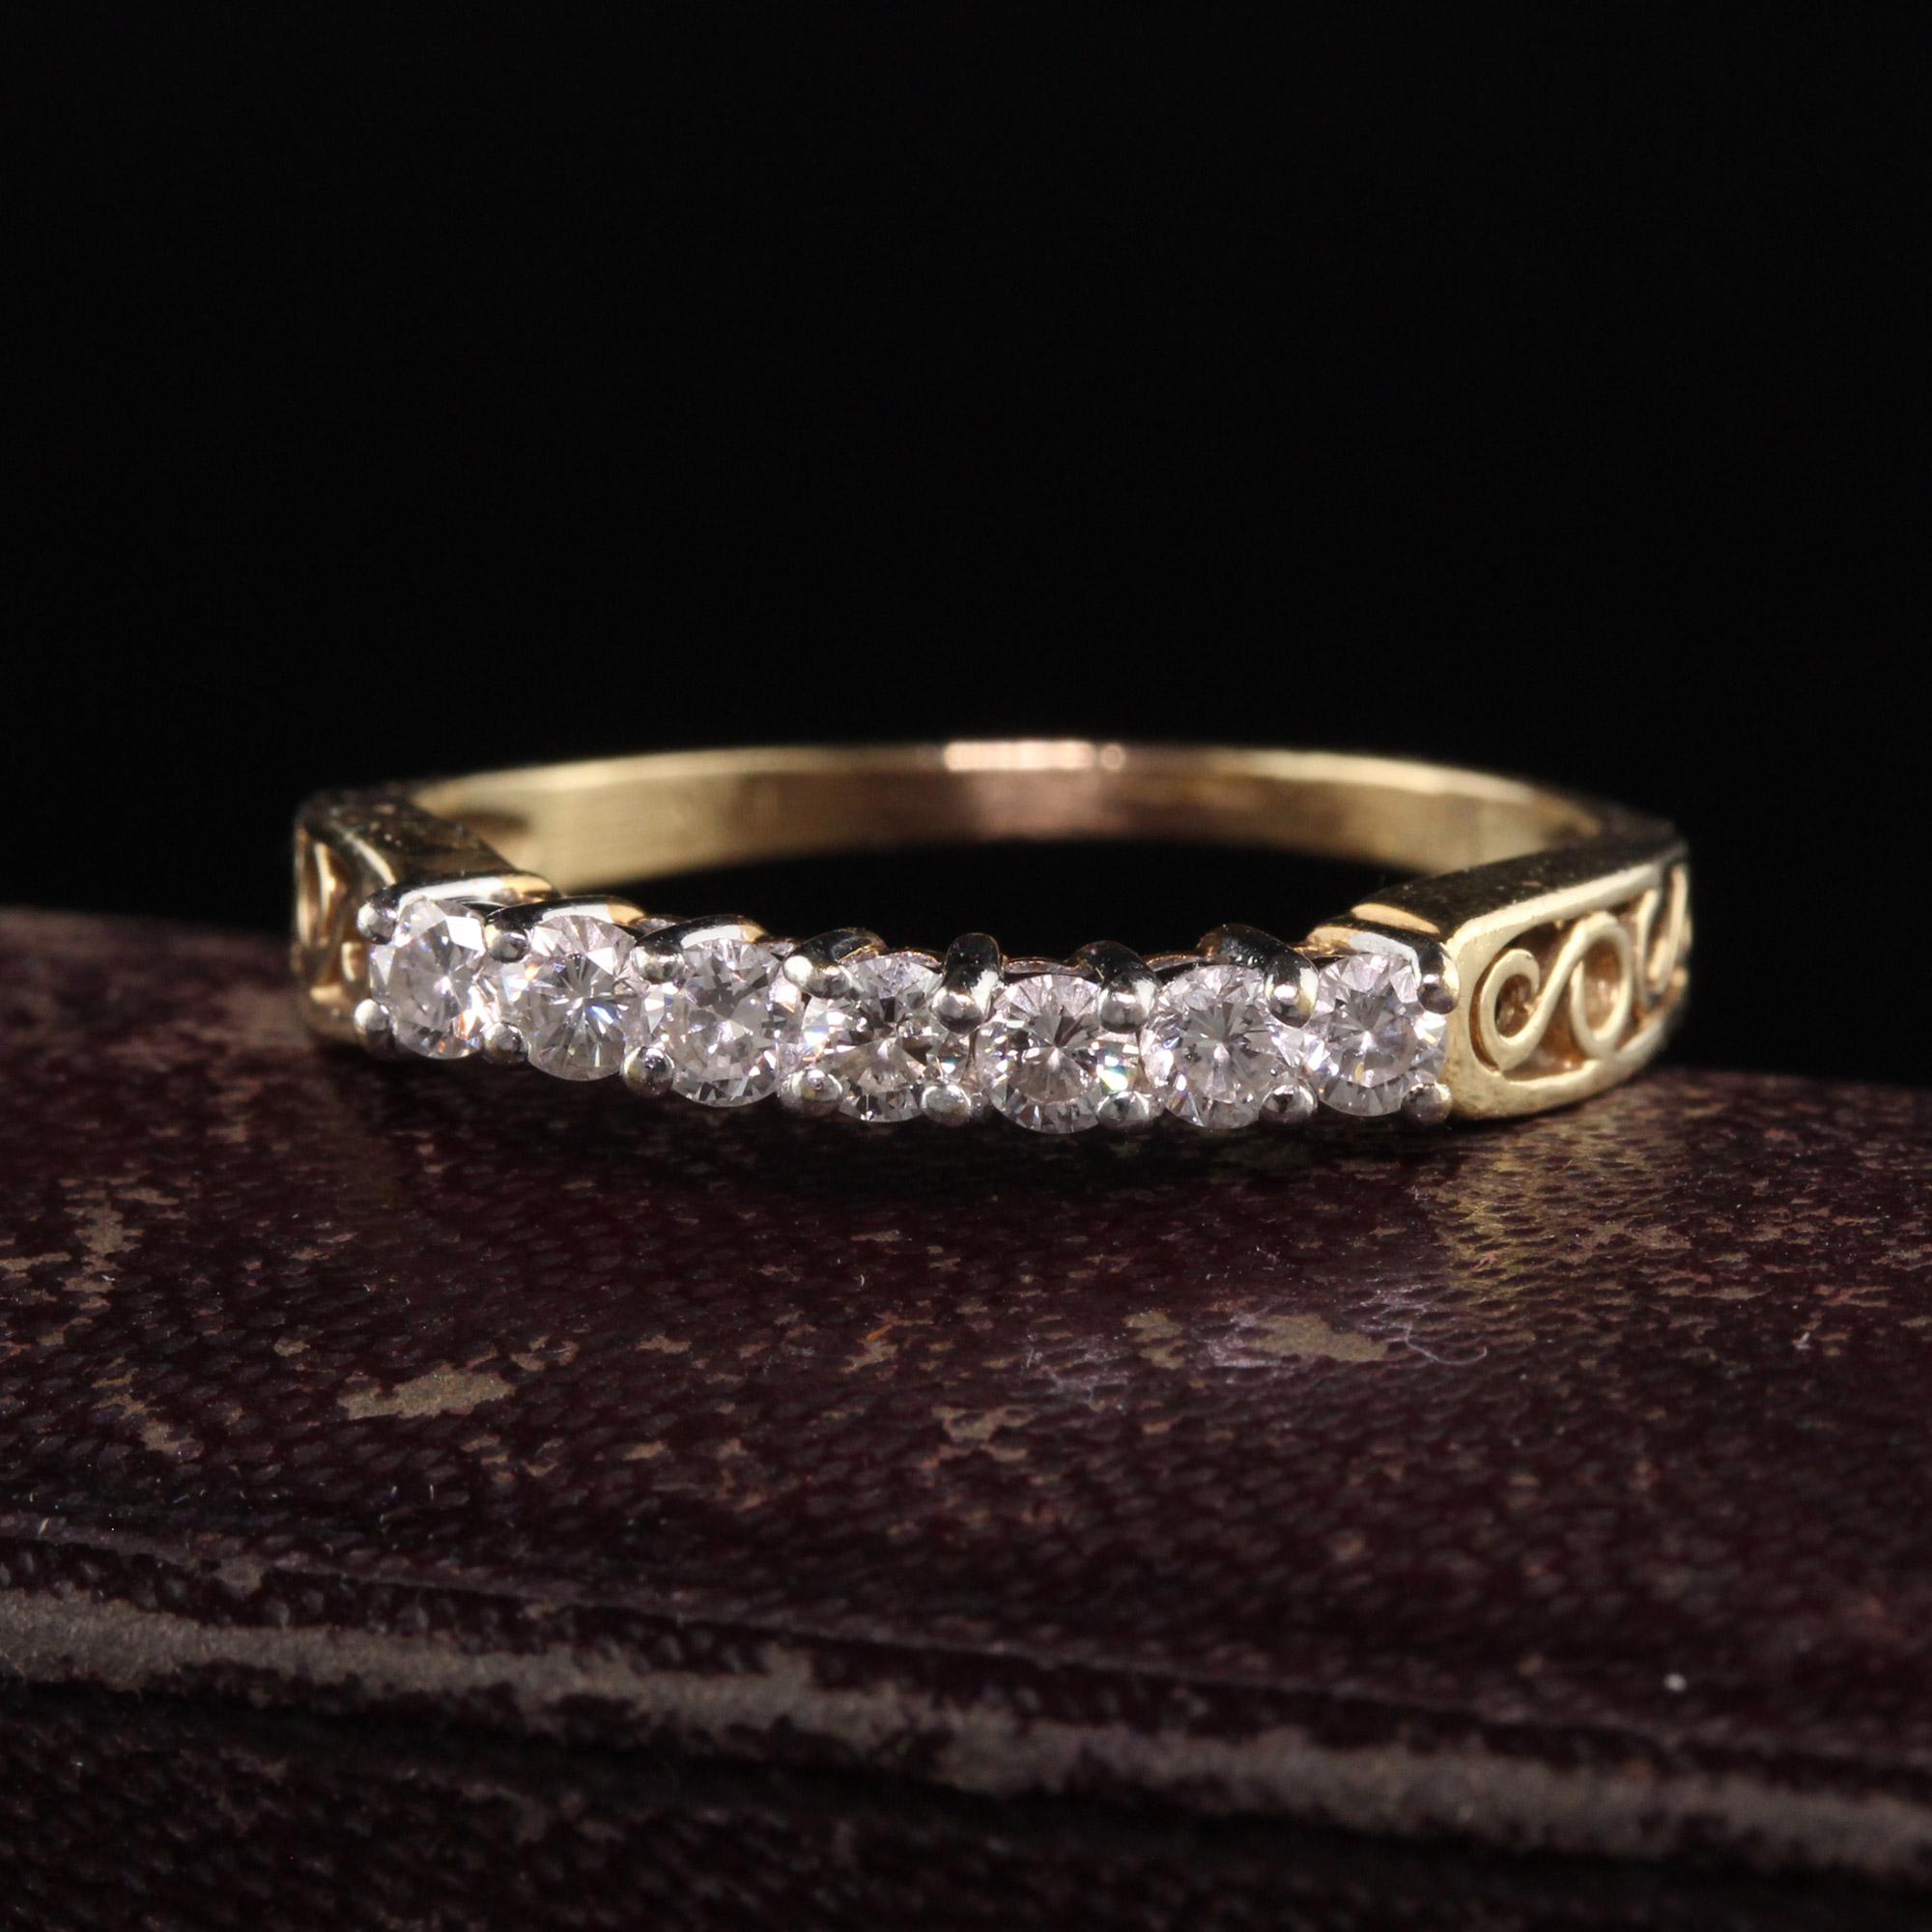 Beautiful Vintage Estate 14K Yellow Gold Two Tone Diamond Filigree Wedding Band. This classic ring is crafted in 14k yellow gold and white gold. The ring has seven diamonds on the top set in white gold prongs and the sides have filigree scroll work.